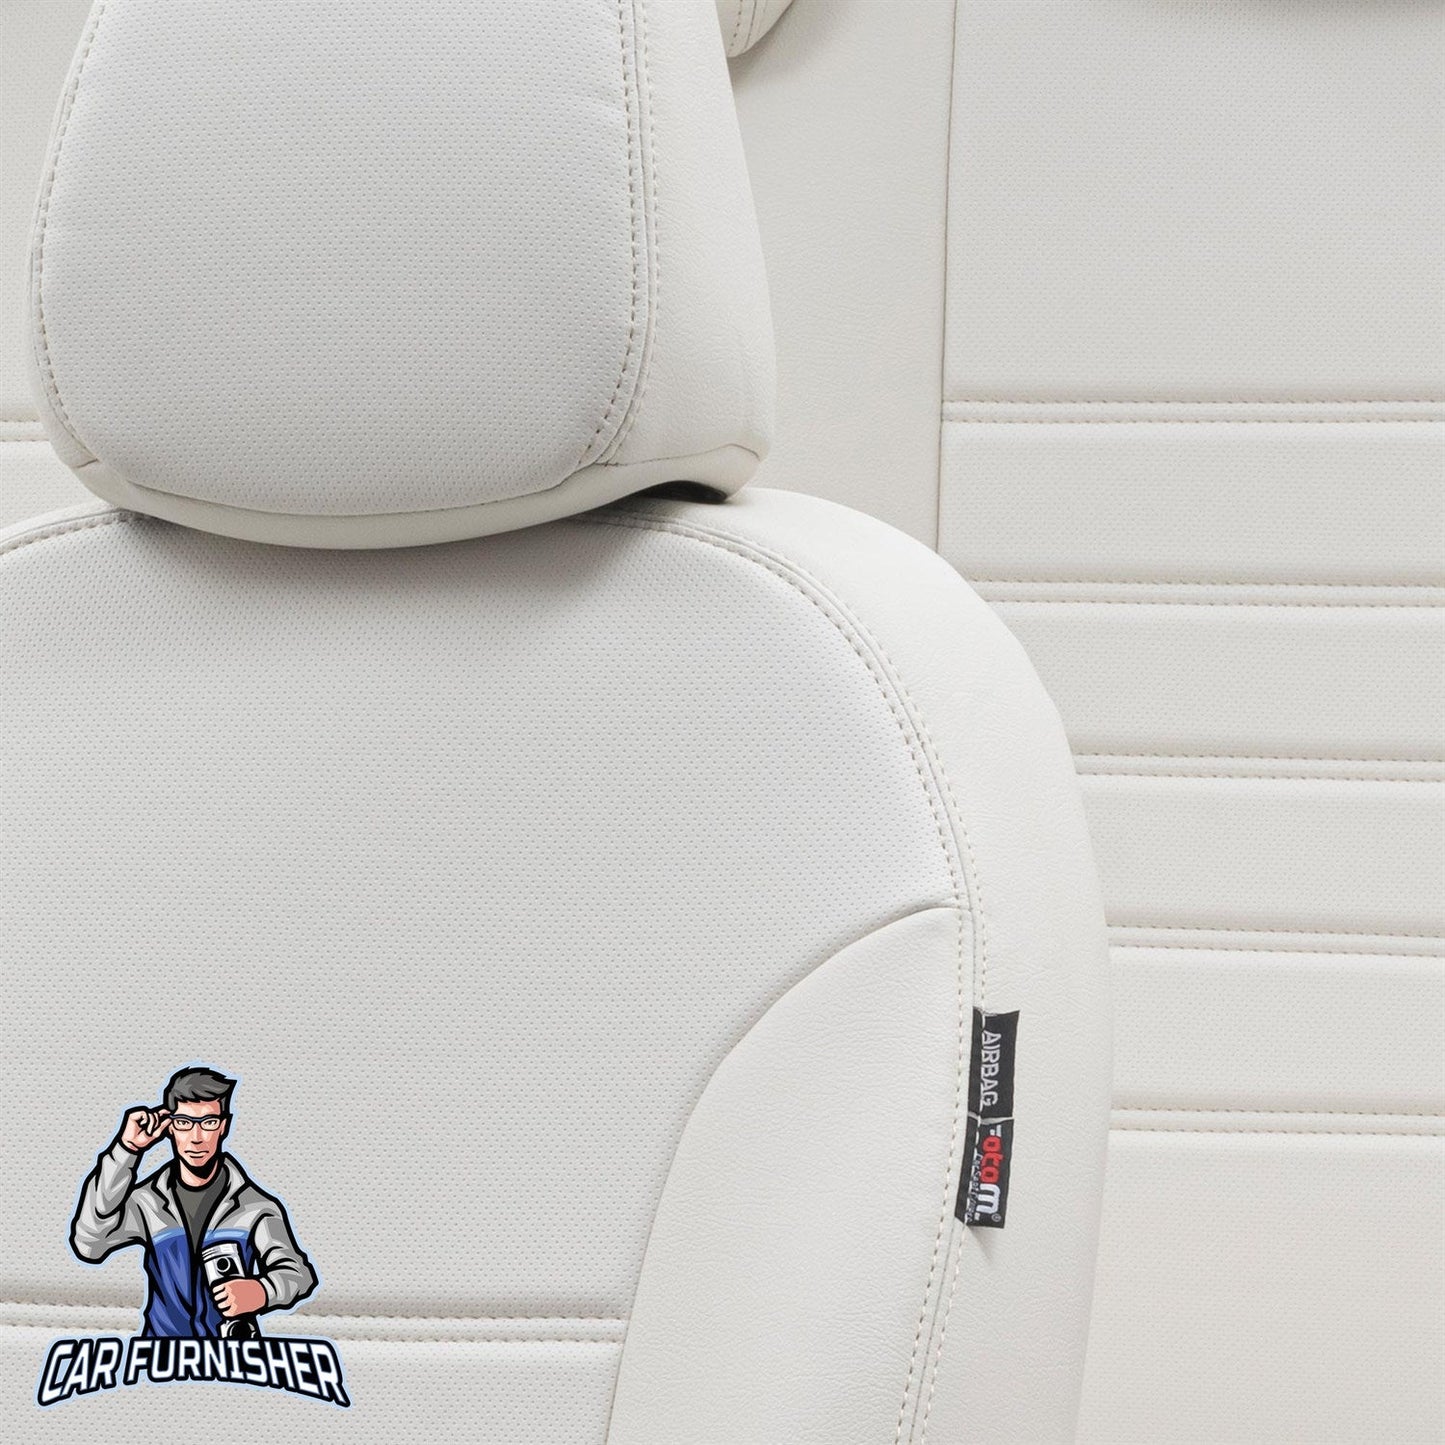 Volkswagen Beetle Seat Cover Istanbul Leather Design Ivory Leather